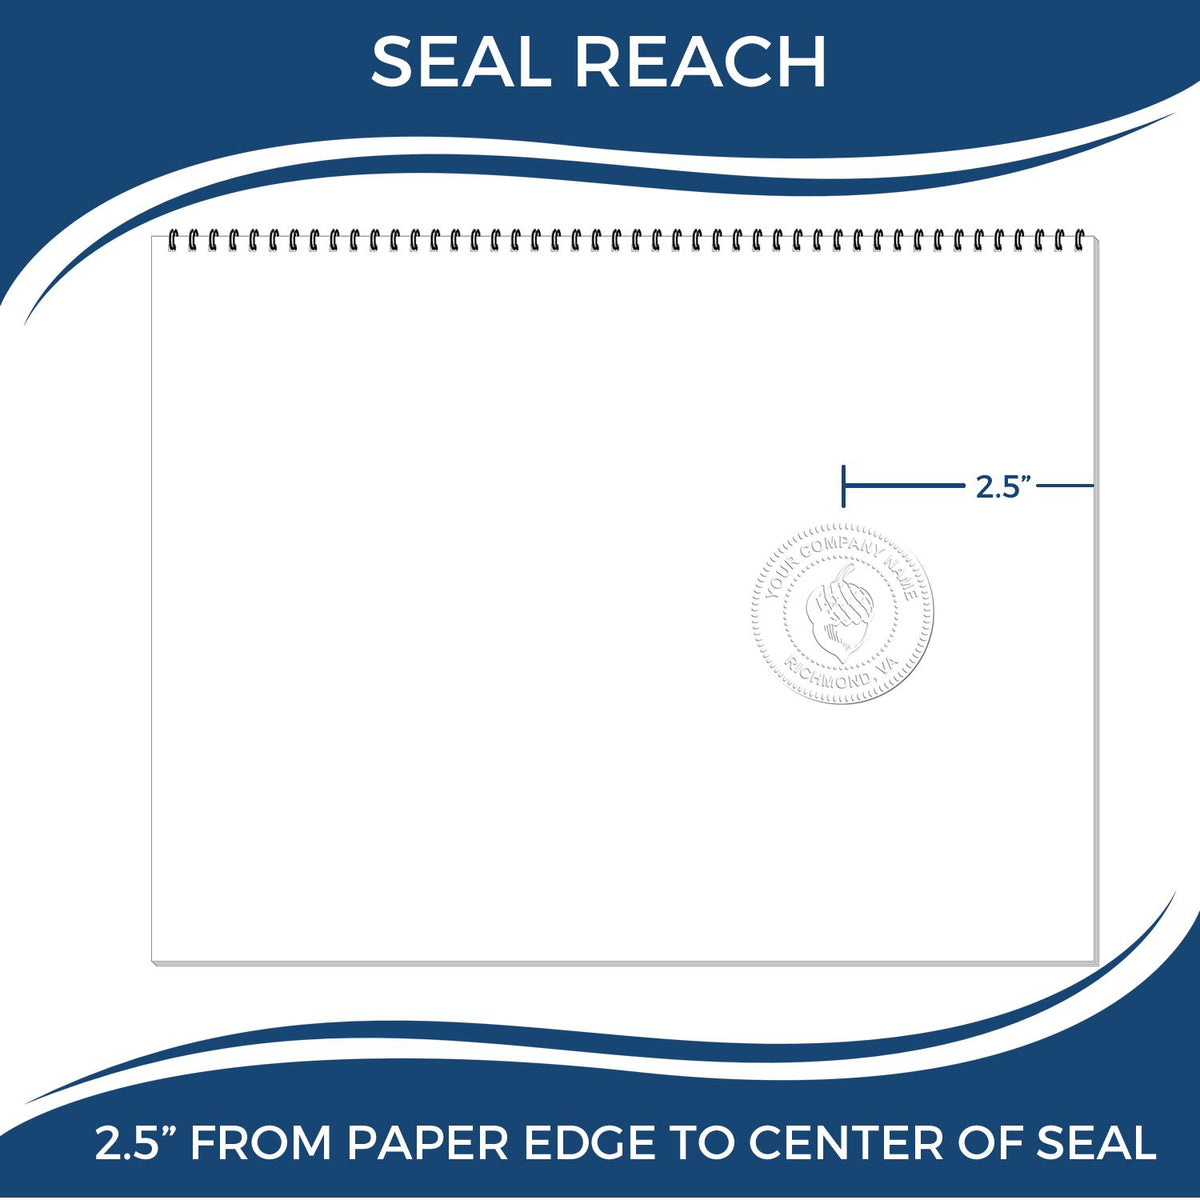 An infographic showing the seal reach which is represented by a ruler and a miniature seal image of the Long Reach Nevada Land Surveyor Seal